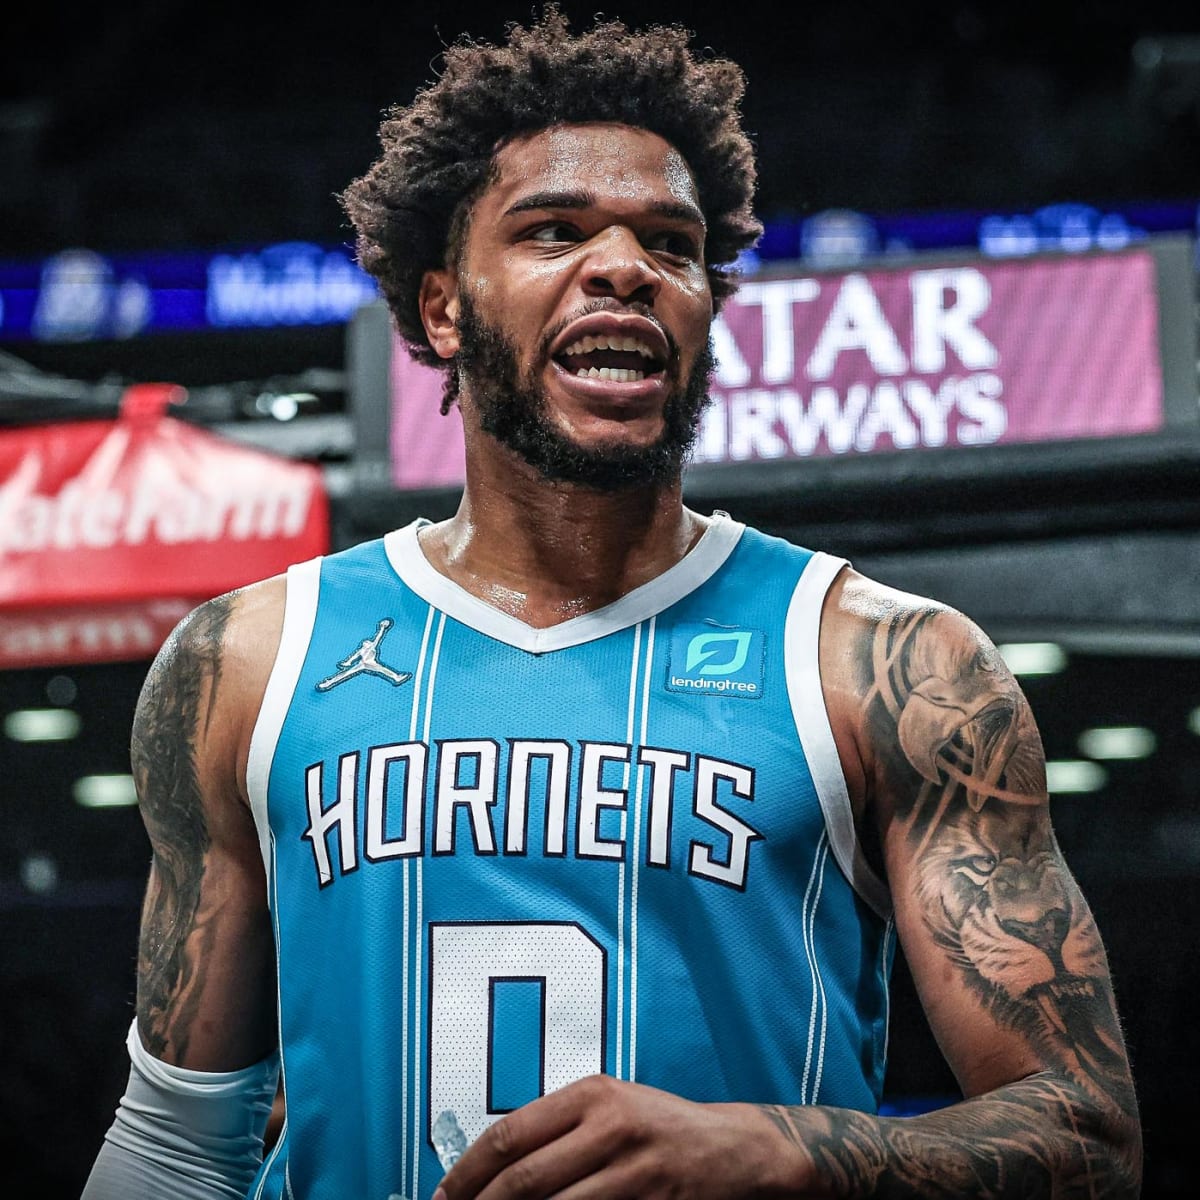 The Charlotte Hornets killed my fandom by standing with Miles Bridges 